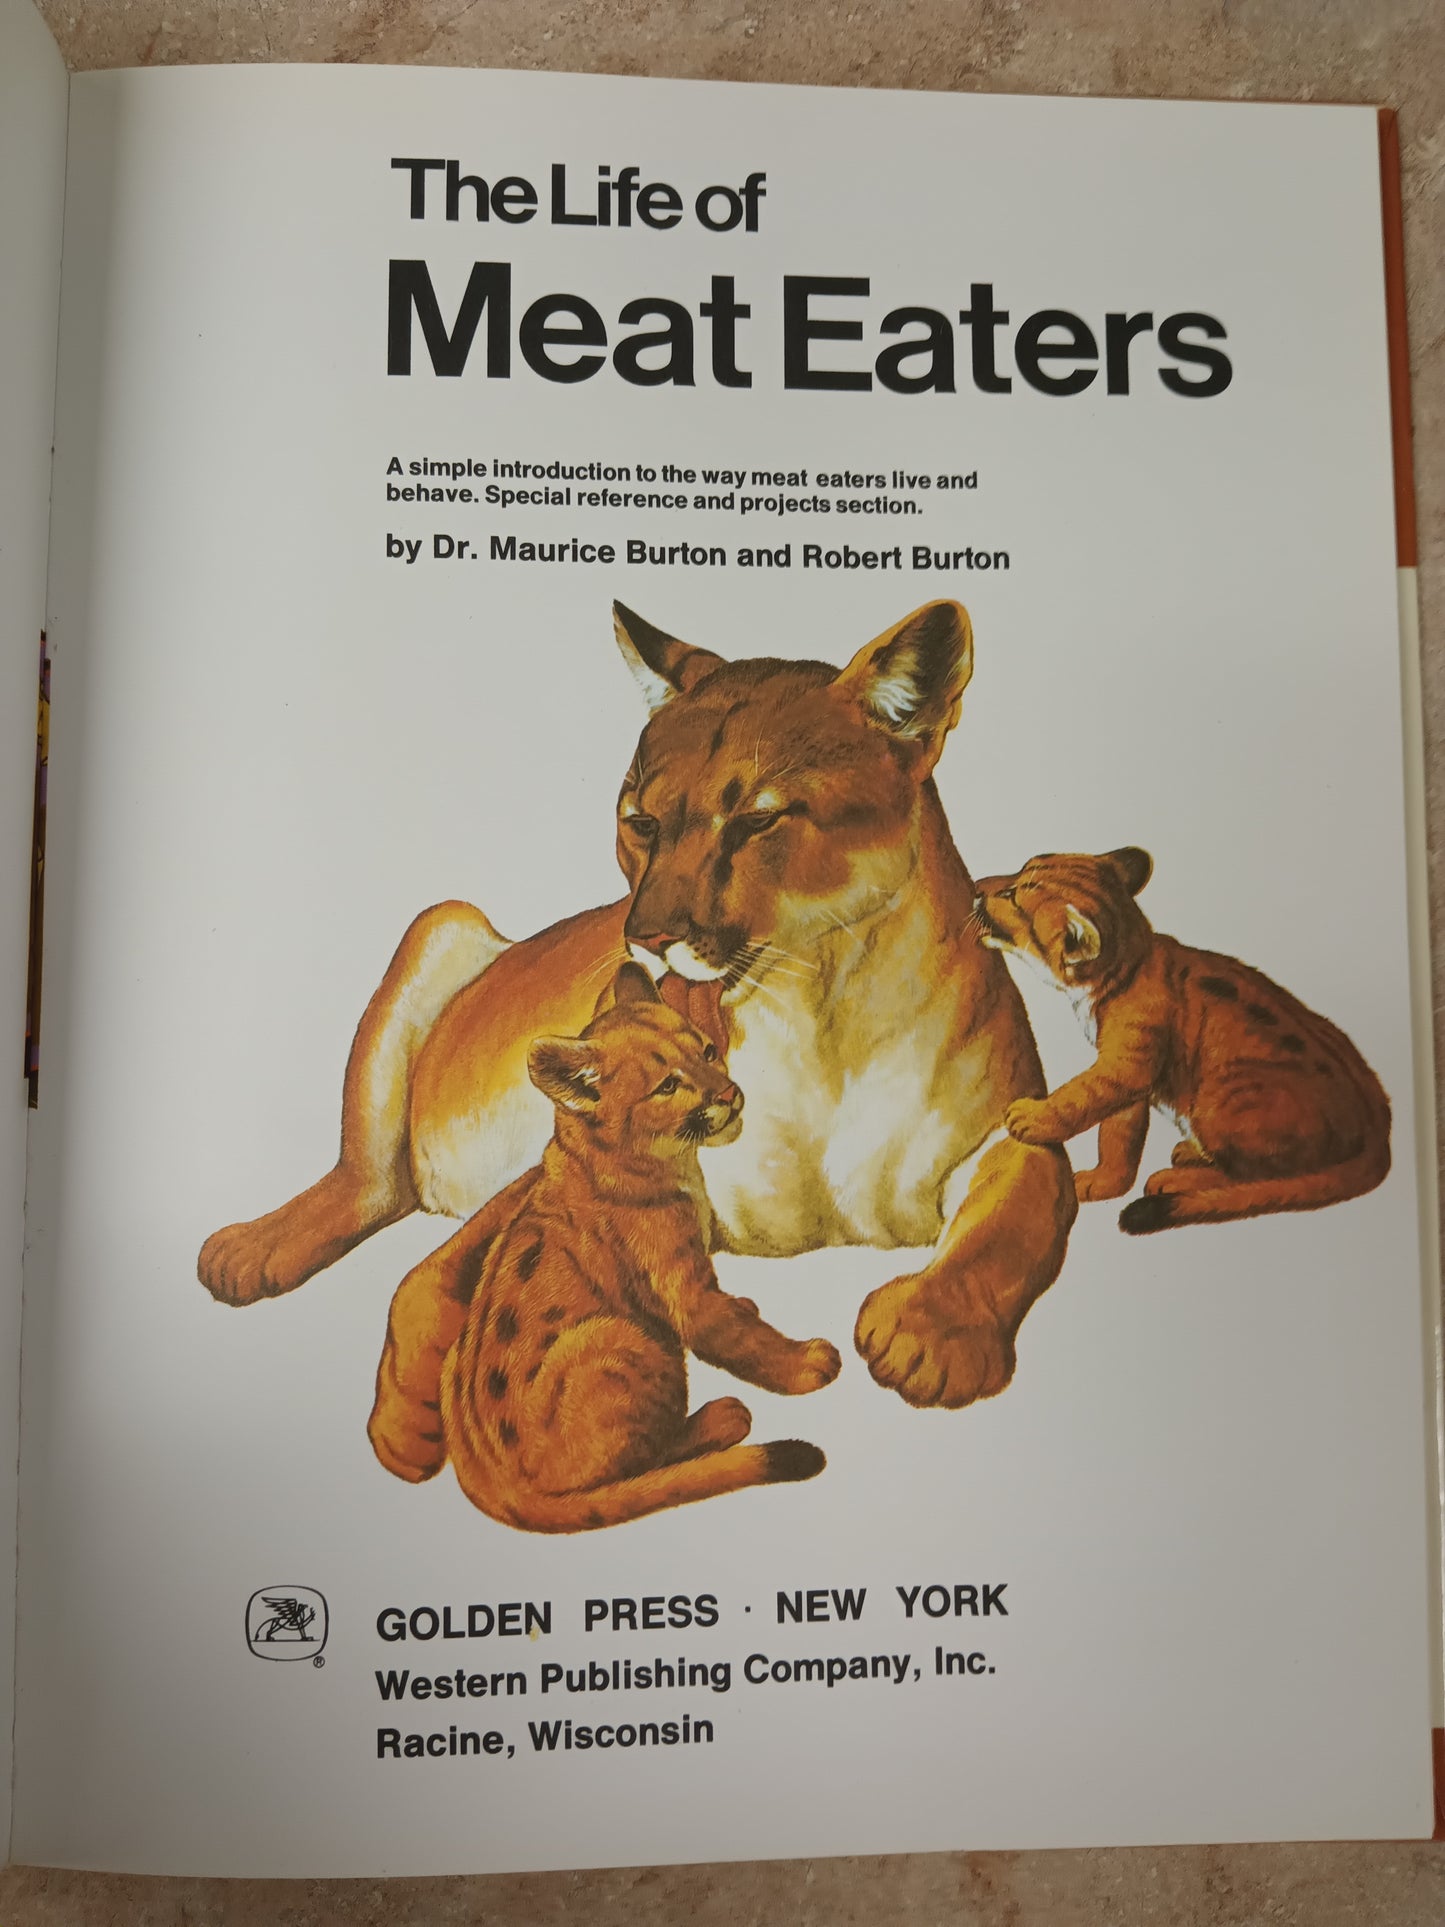 The Life of Meat Eaters